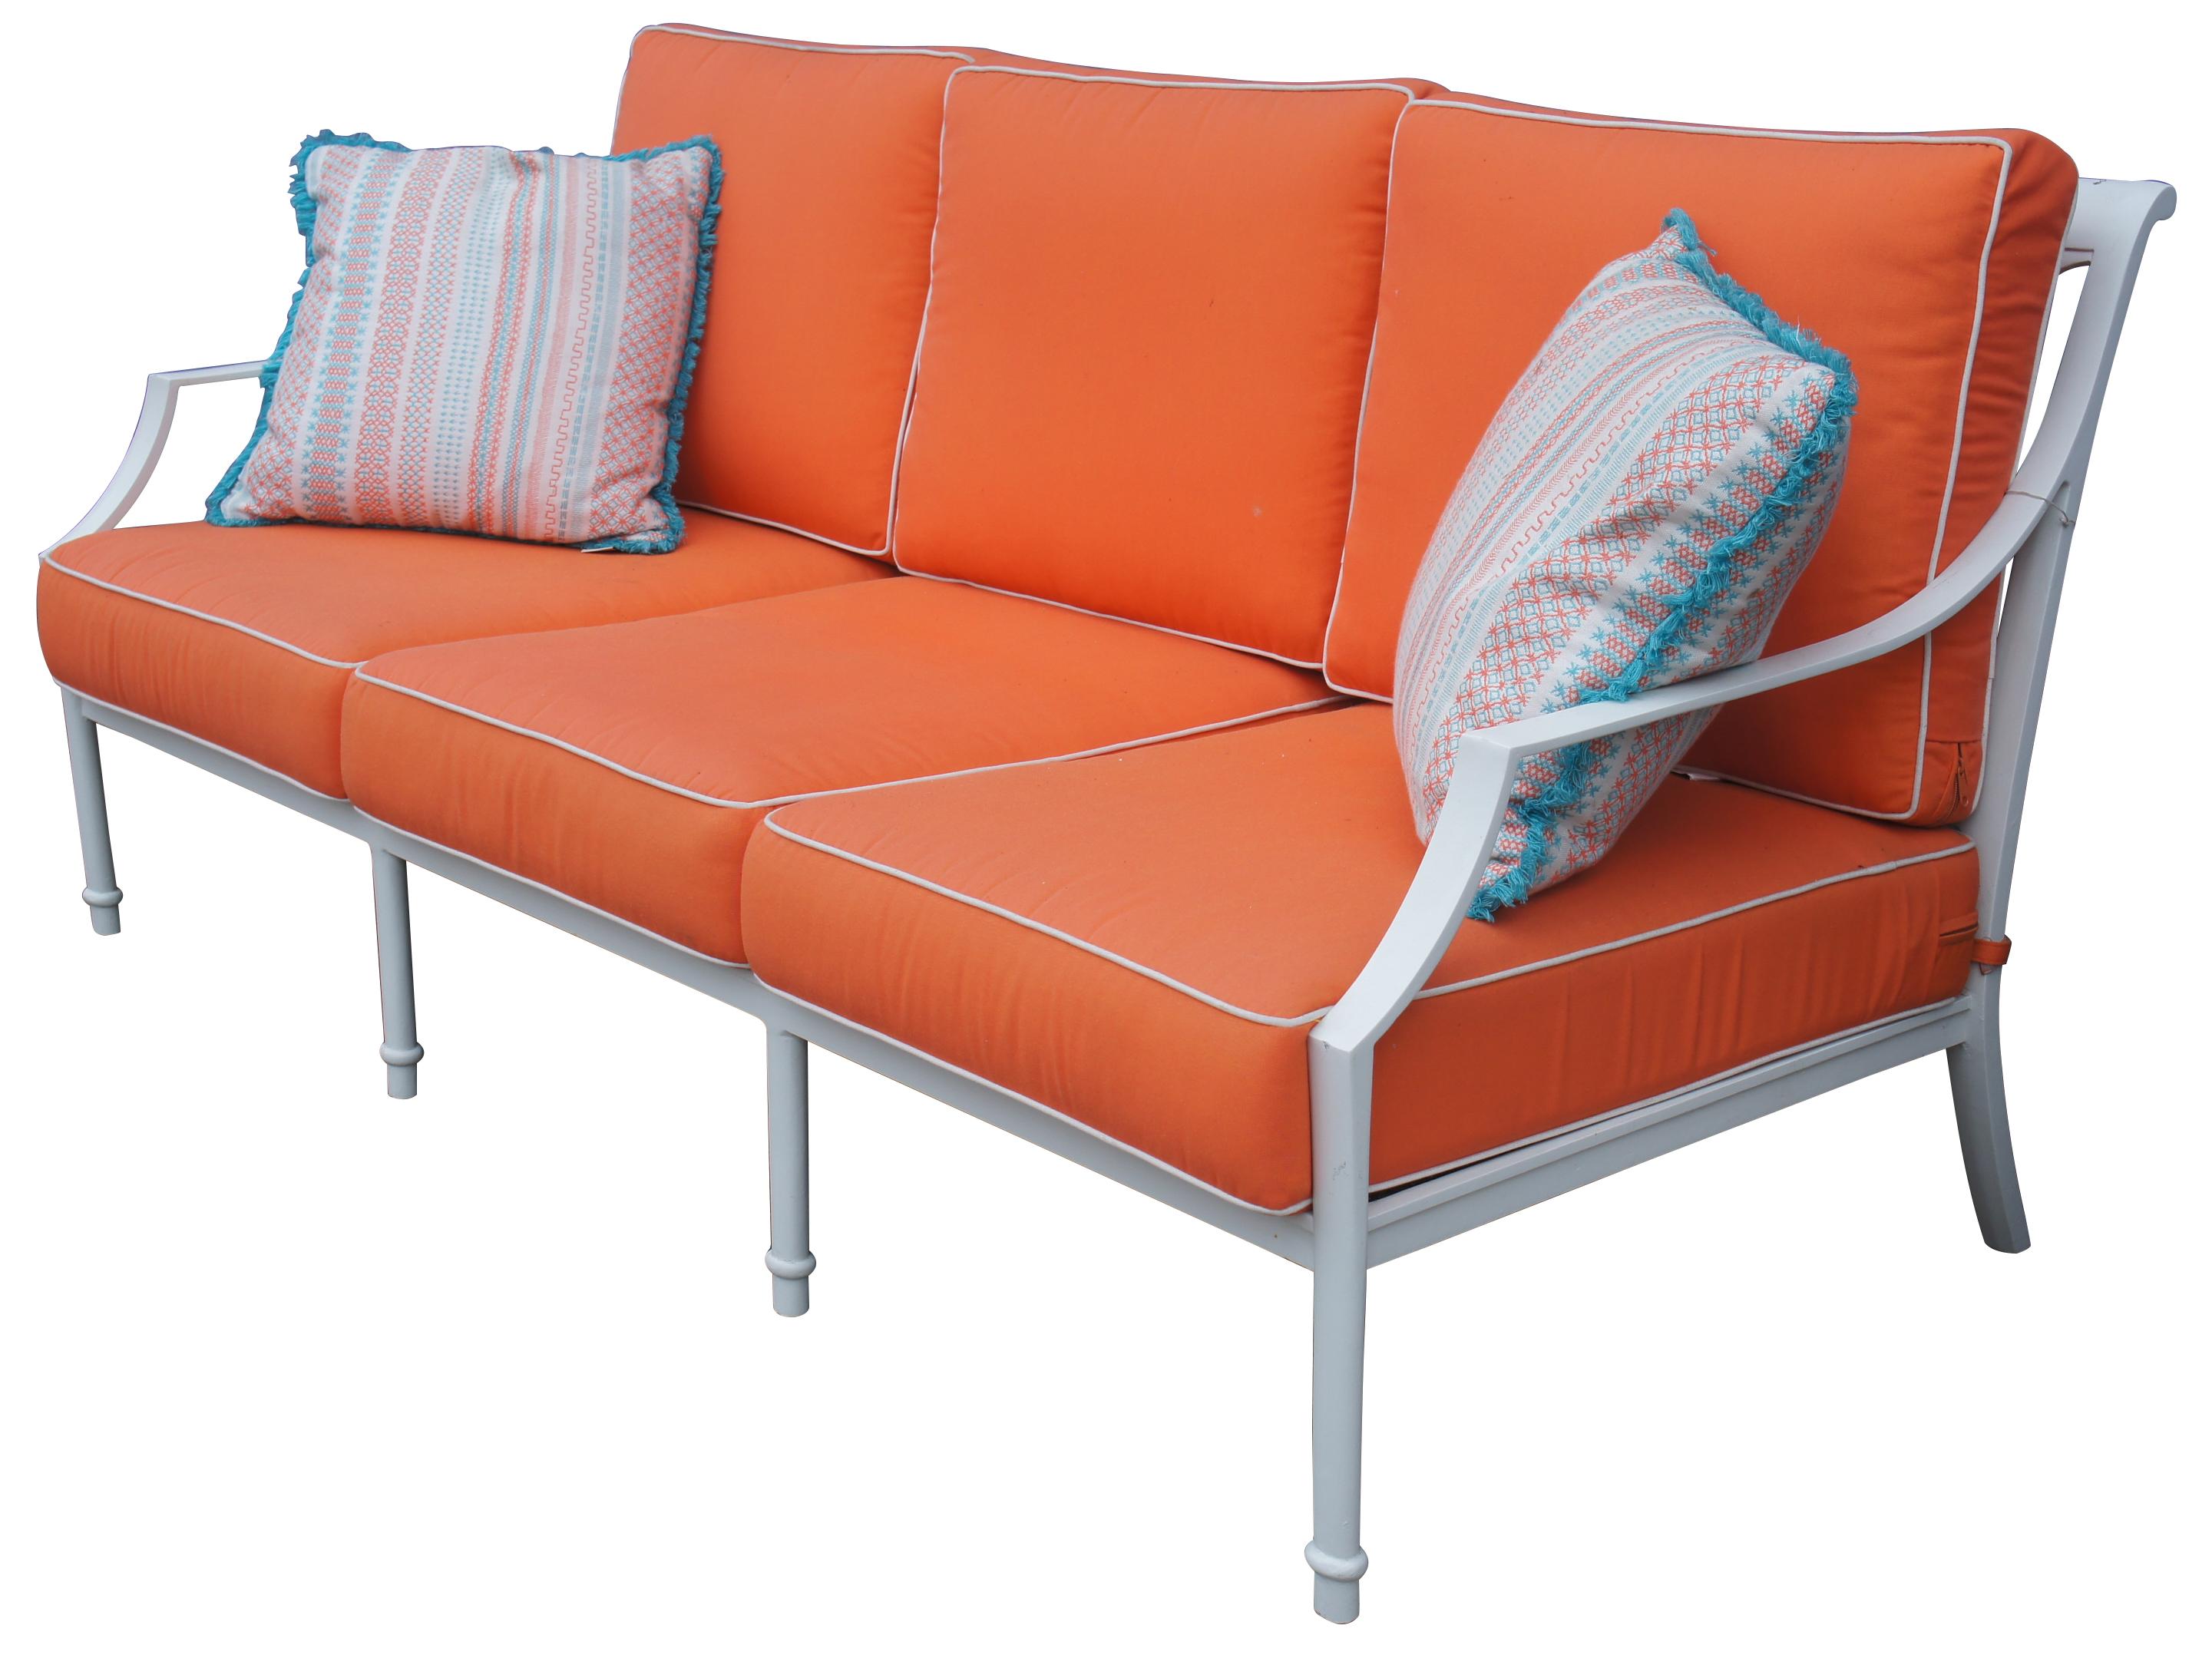 Grayson French inspired aluminum sofa with orange cushions and lattice back 28070

The perfect garden party. That’s what Grayson calls to mind. This timeless seating collection is elegant without being fussy, with a high lattice back and airy